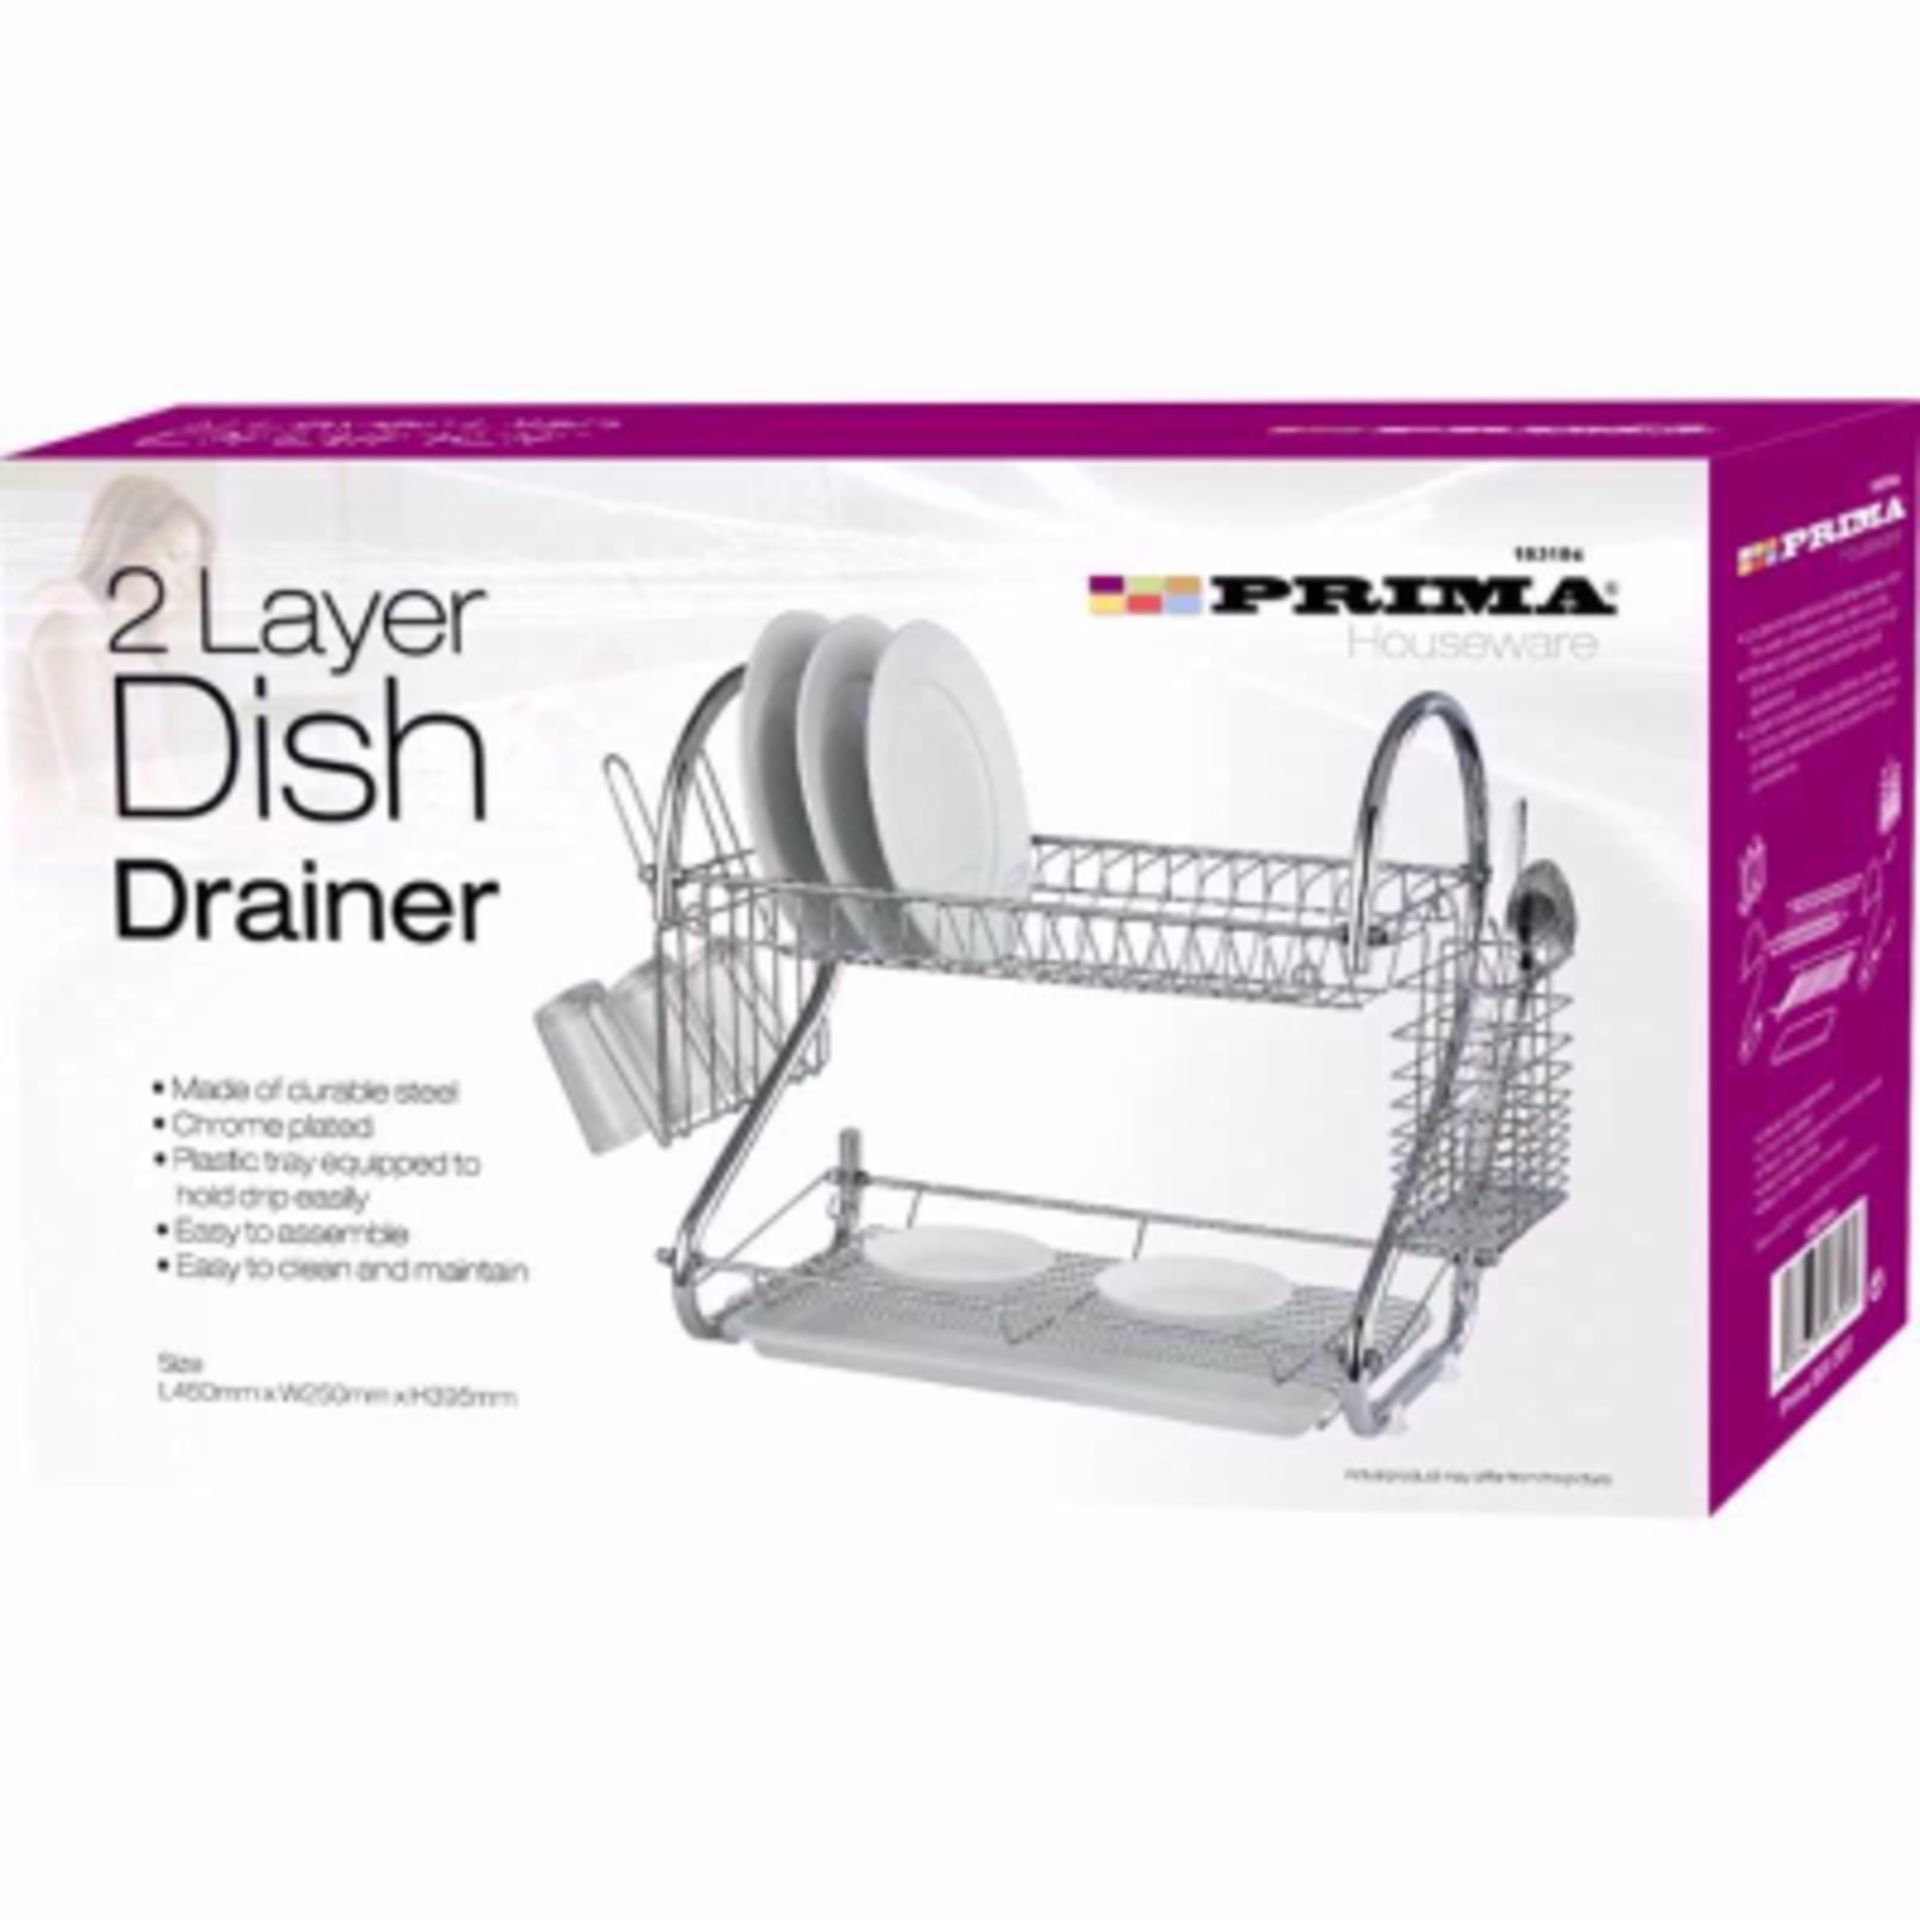 V Brand New Two Layer Chrome Plated Dish Drainer - With Plastic Tray - Easy to Assemble